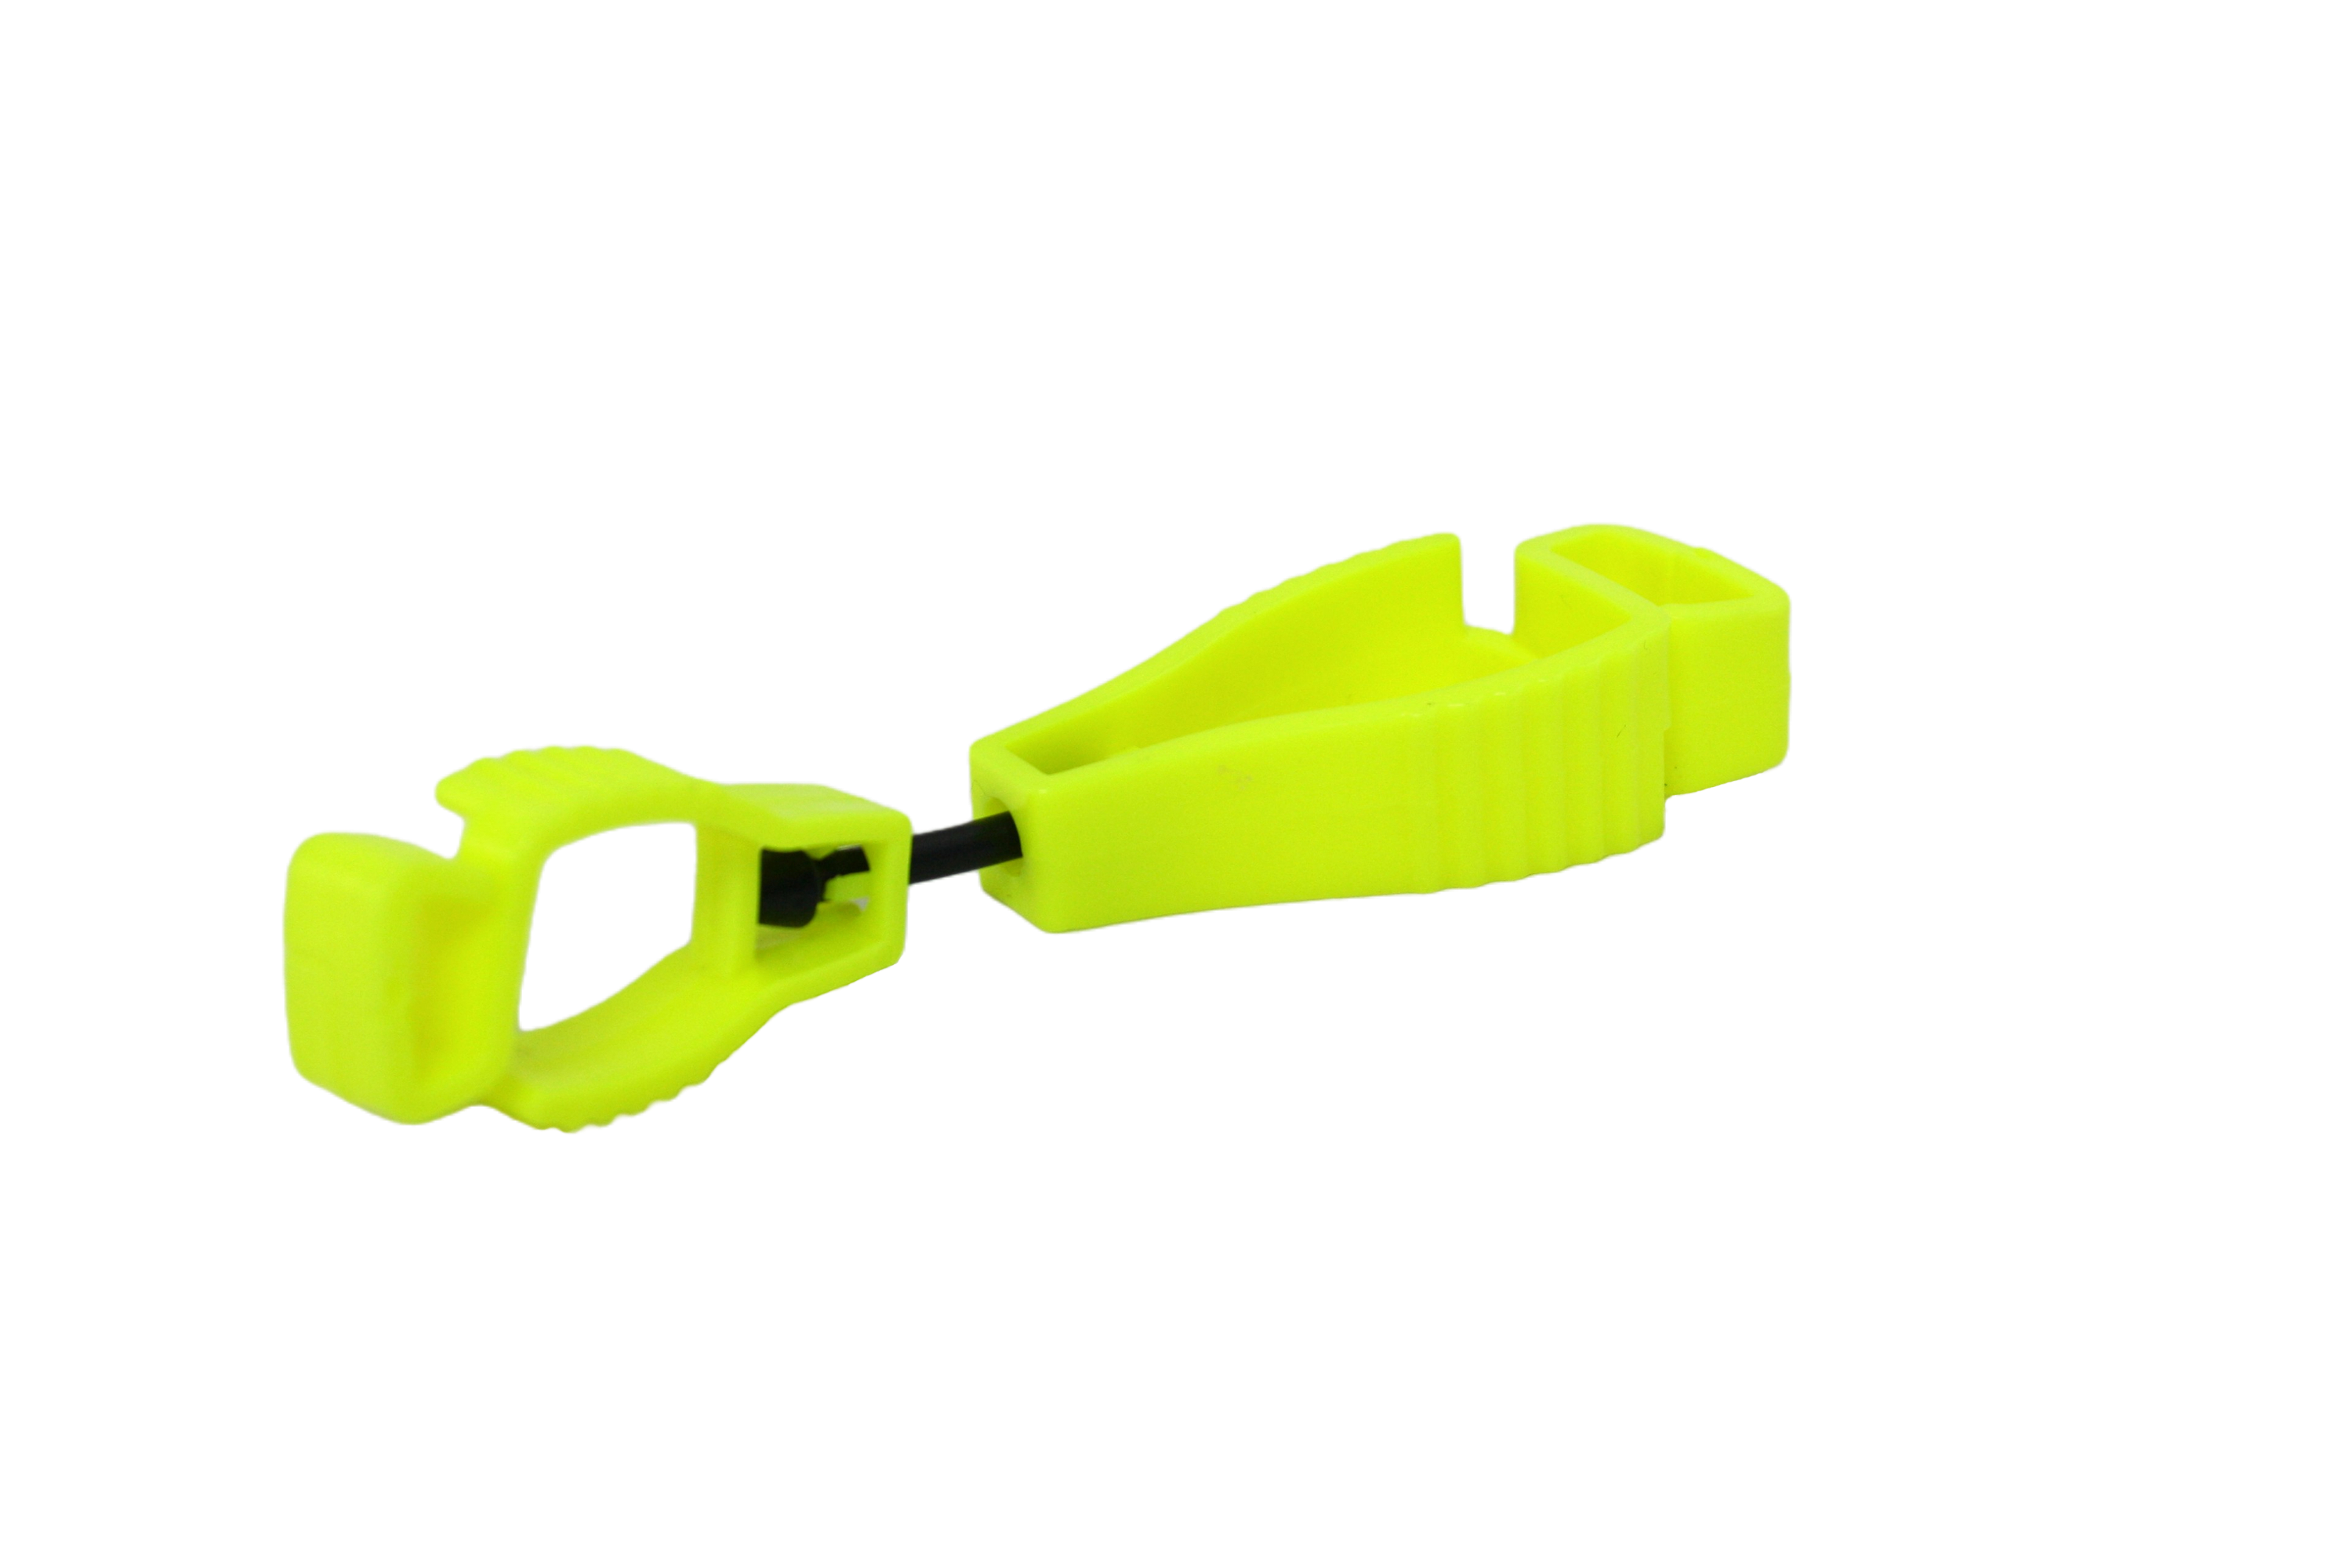 Another angle of the yellow glove clip, showing how each end can twist independently from the other